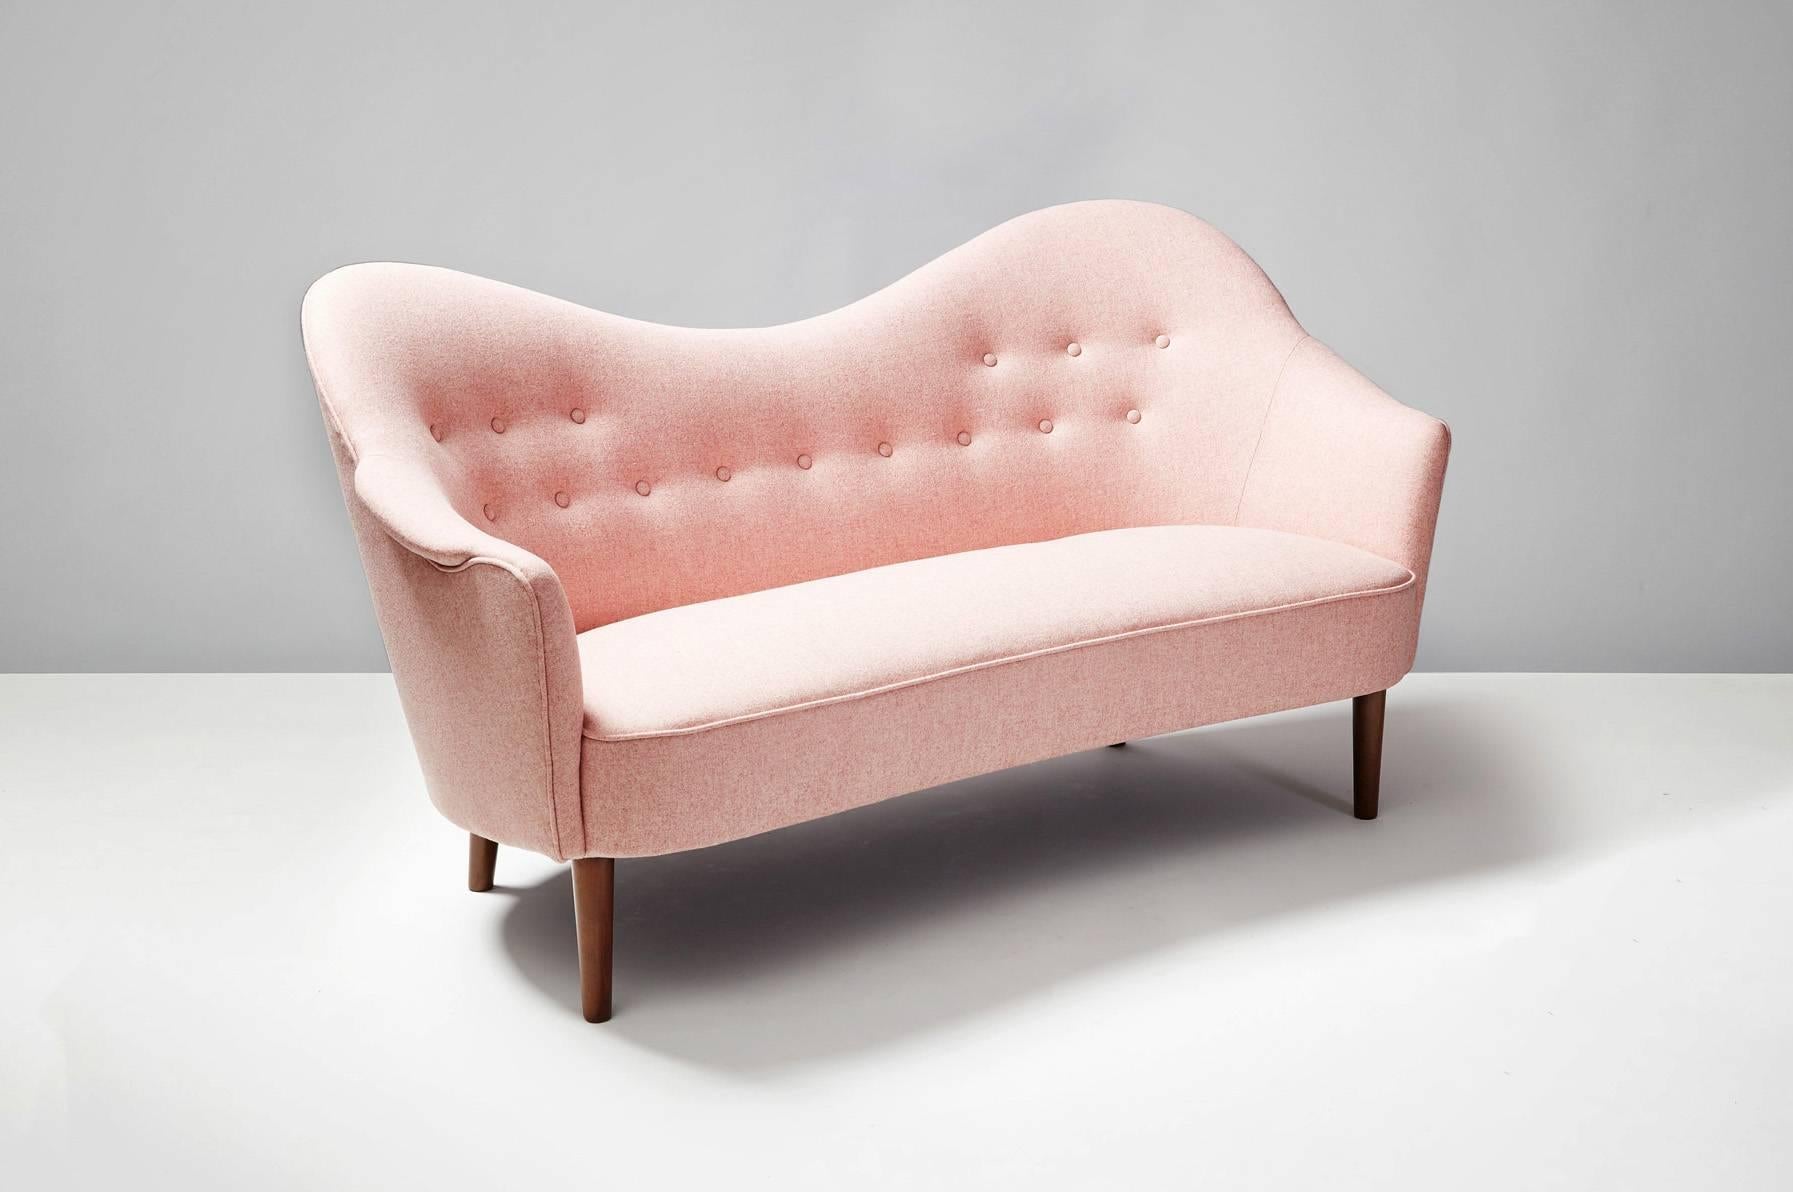 The Samspel 2-seat sofa was first designed in 1956 by Swedish master Carl Malmsten and produced by AB Record in Bollnas, Sweden. This example has been completely Reupholstered in dusty pink Abraham Melton wool fabric. The legs are turned,